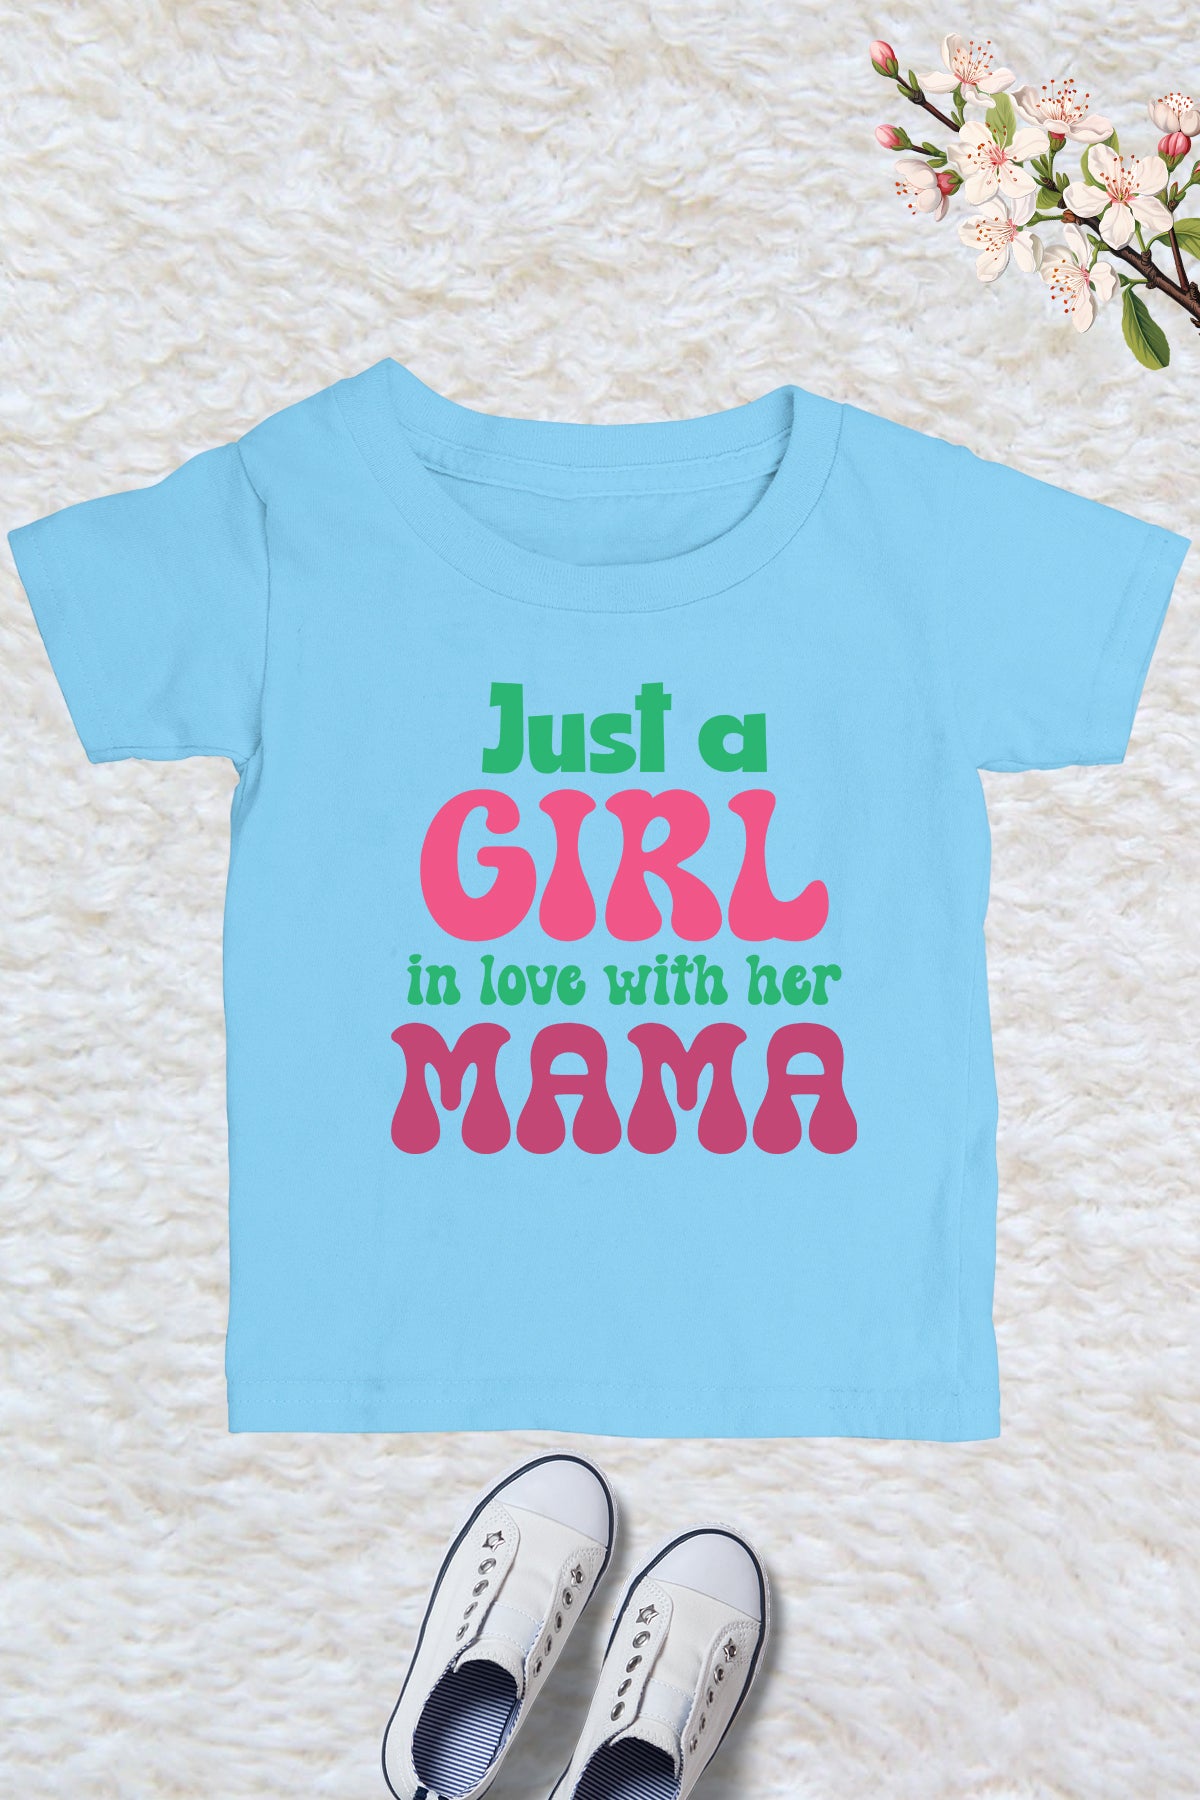 Just a Girl In Love with His Mama Kids T Shirt